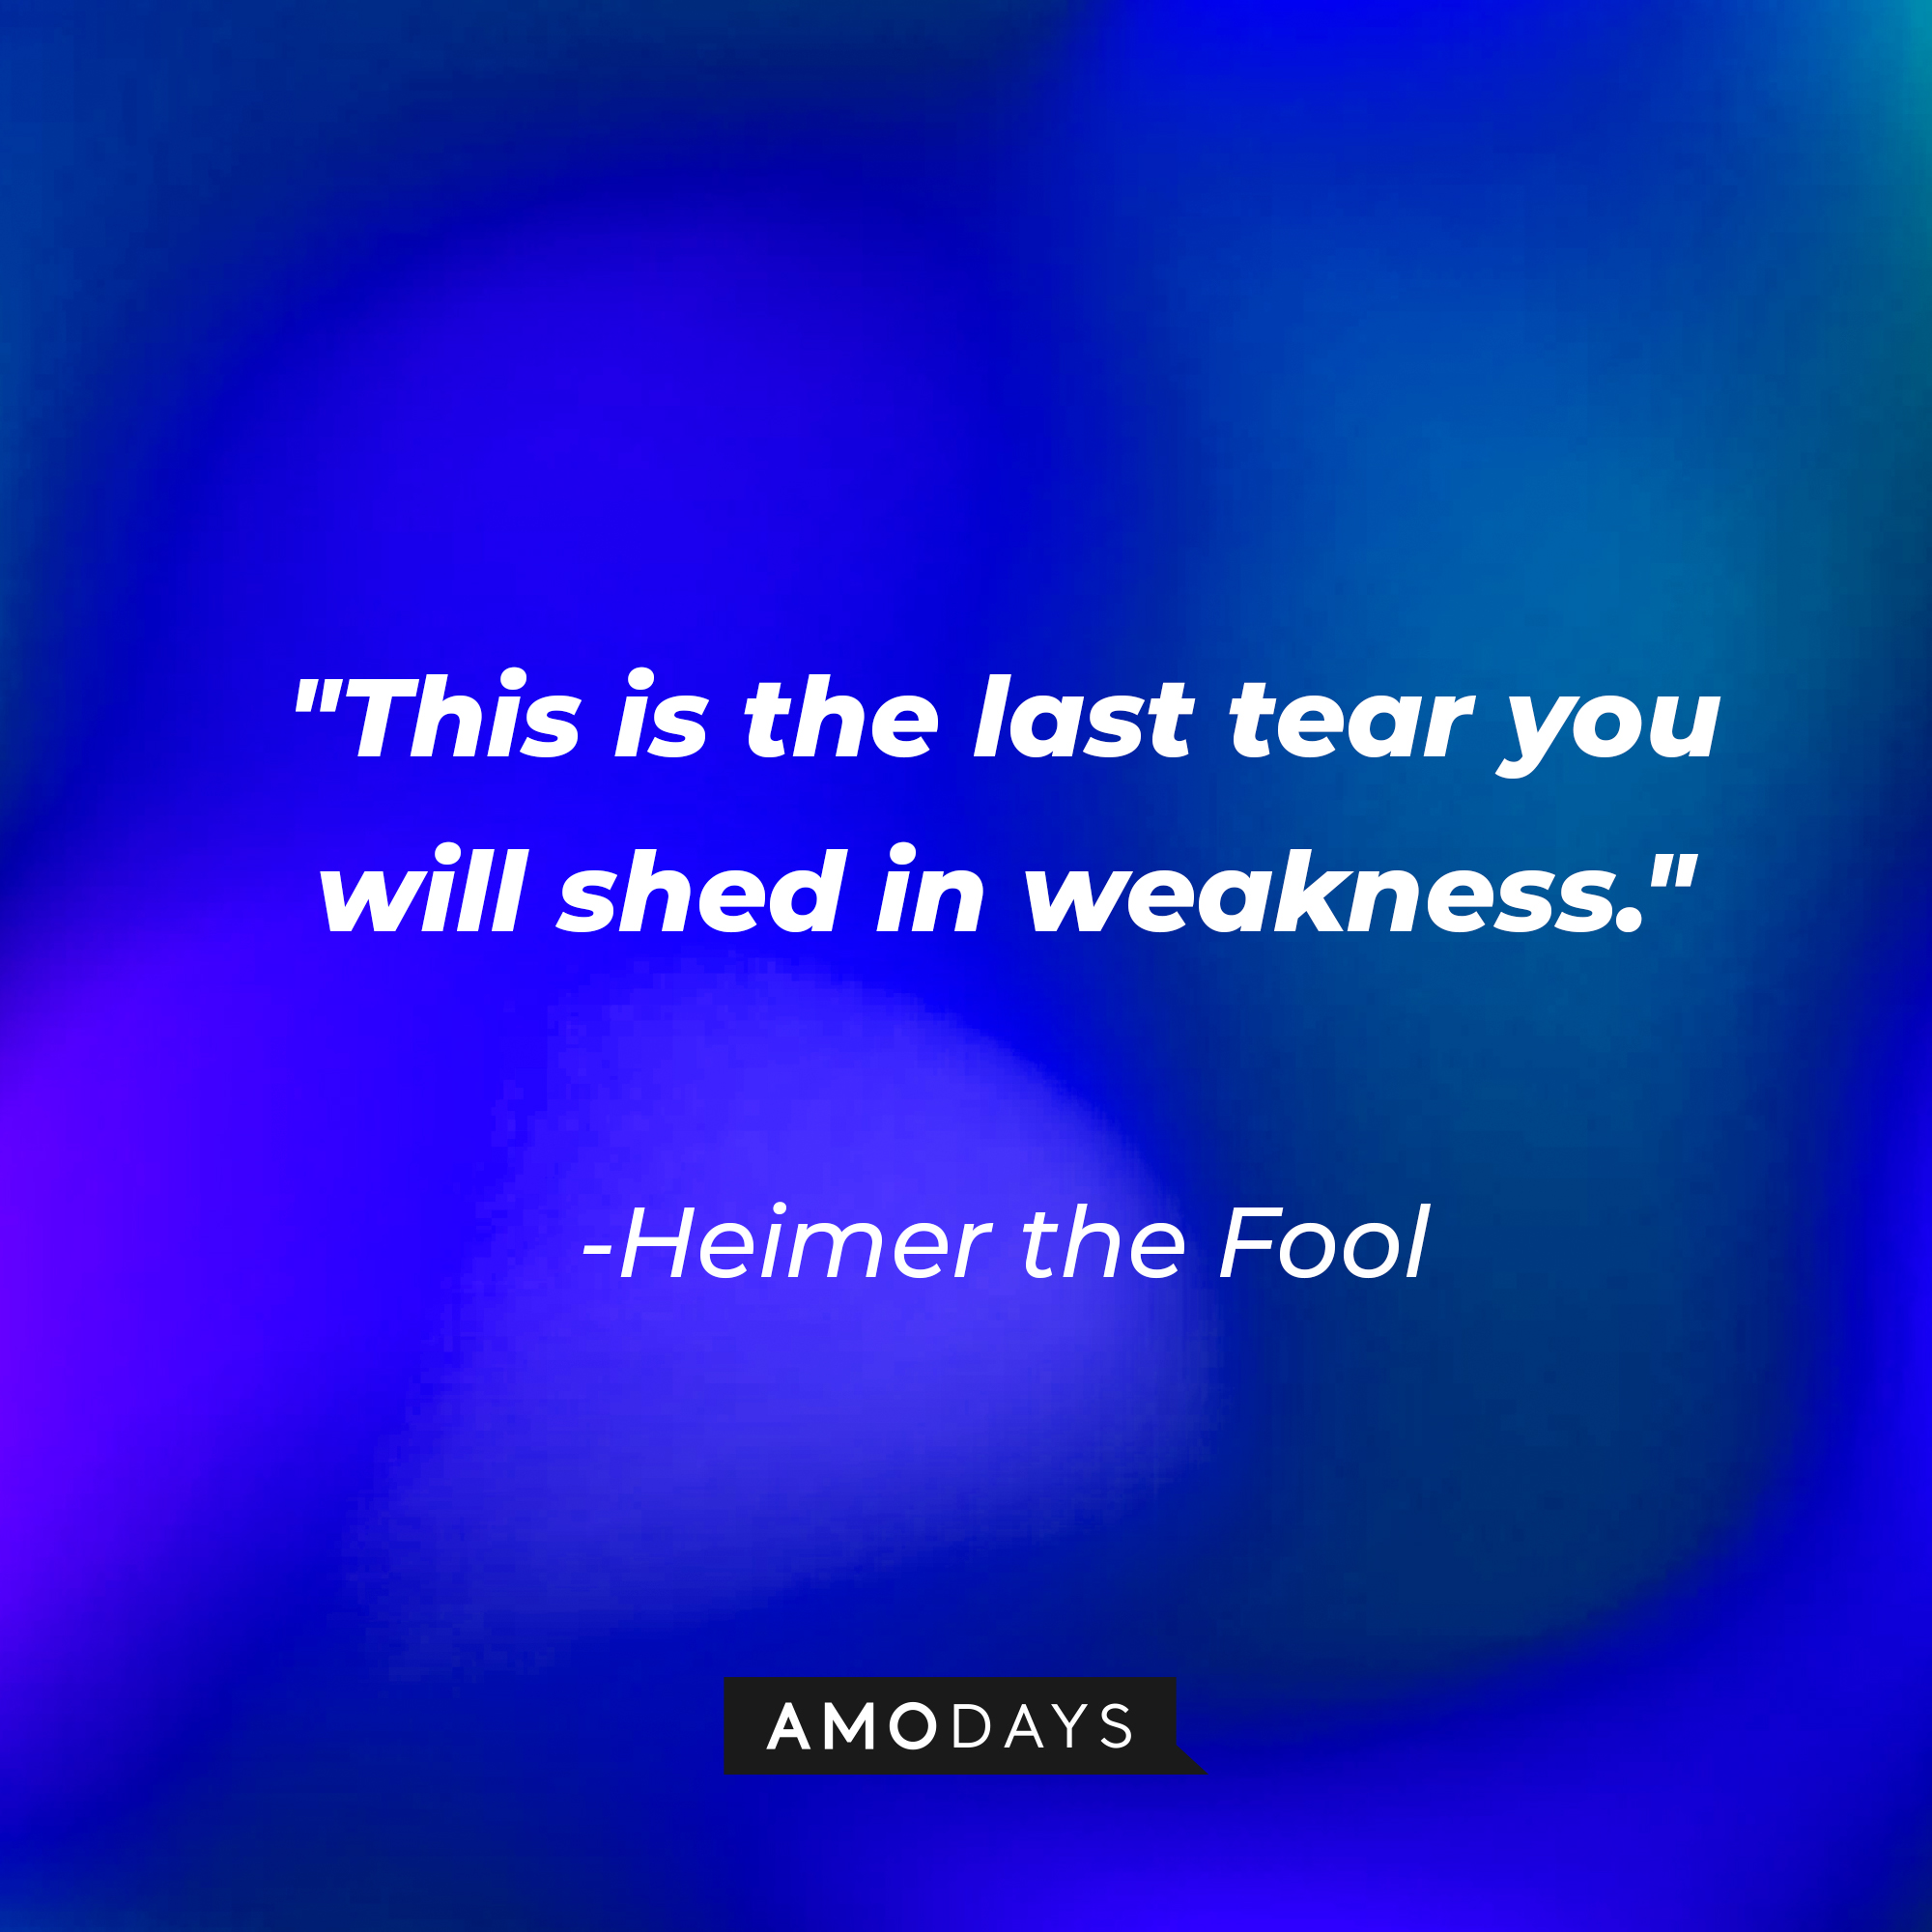 Heimer the Fool's quote: "This is the last tear you will shed in weakness." | Source: AmoDays